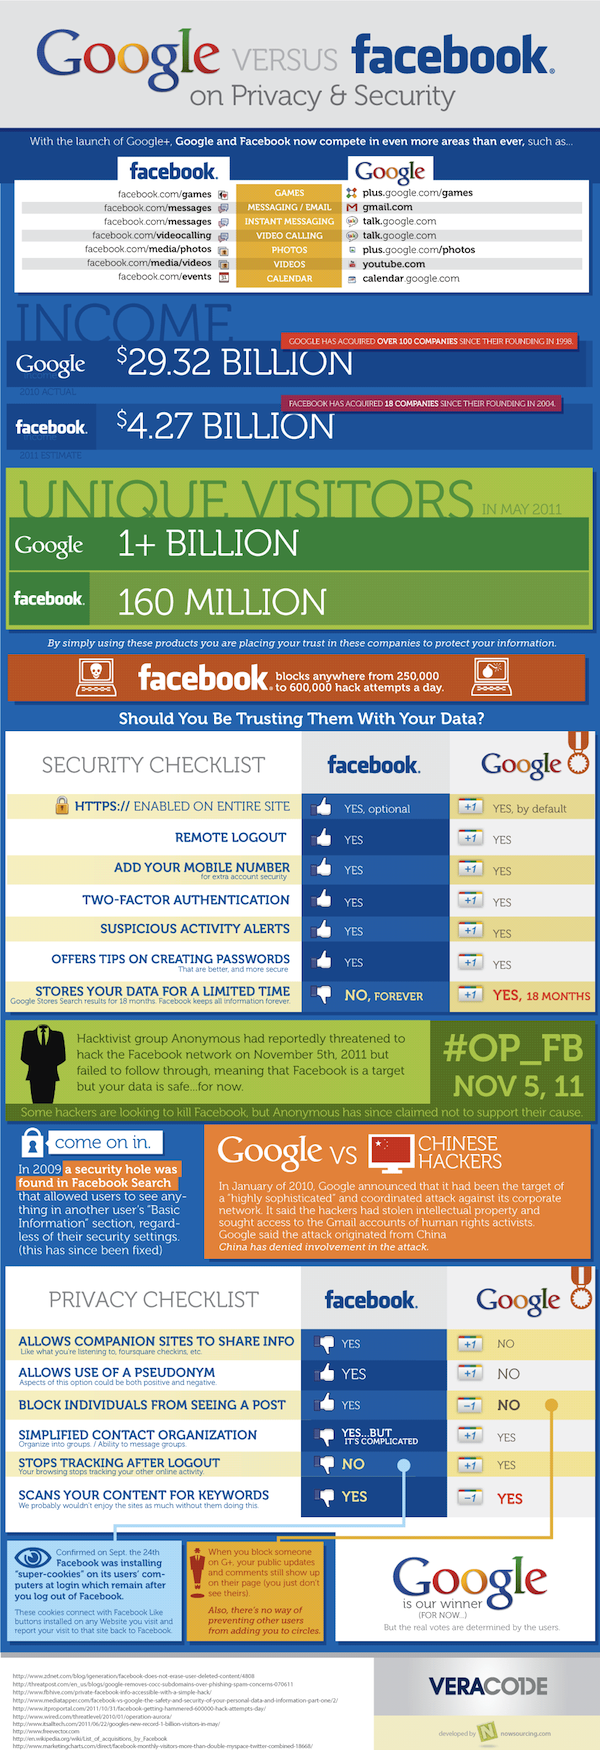 Google vs. Facebook on Privacy and Security 1